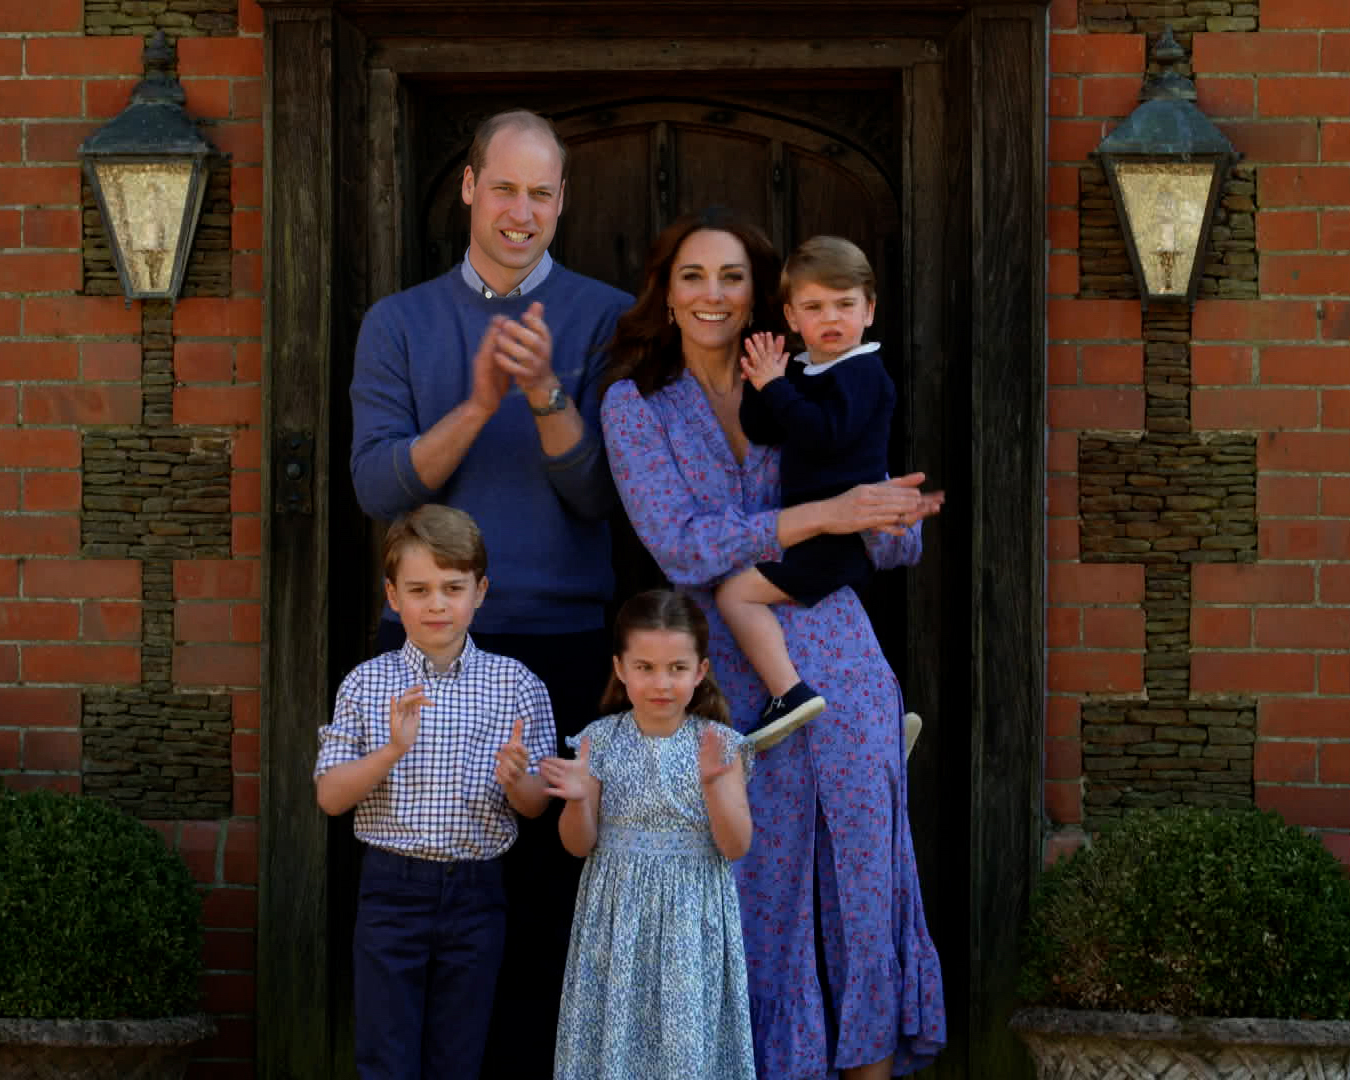 The Prince and Princess of Wales with their children on April 23, 2020 in London, England | Source: Getty Images